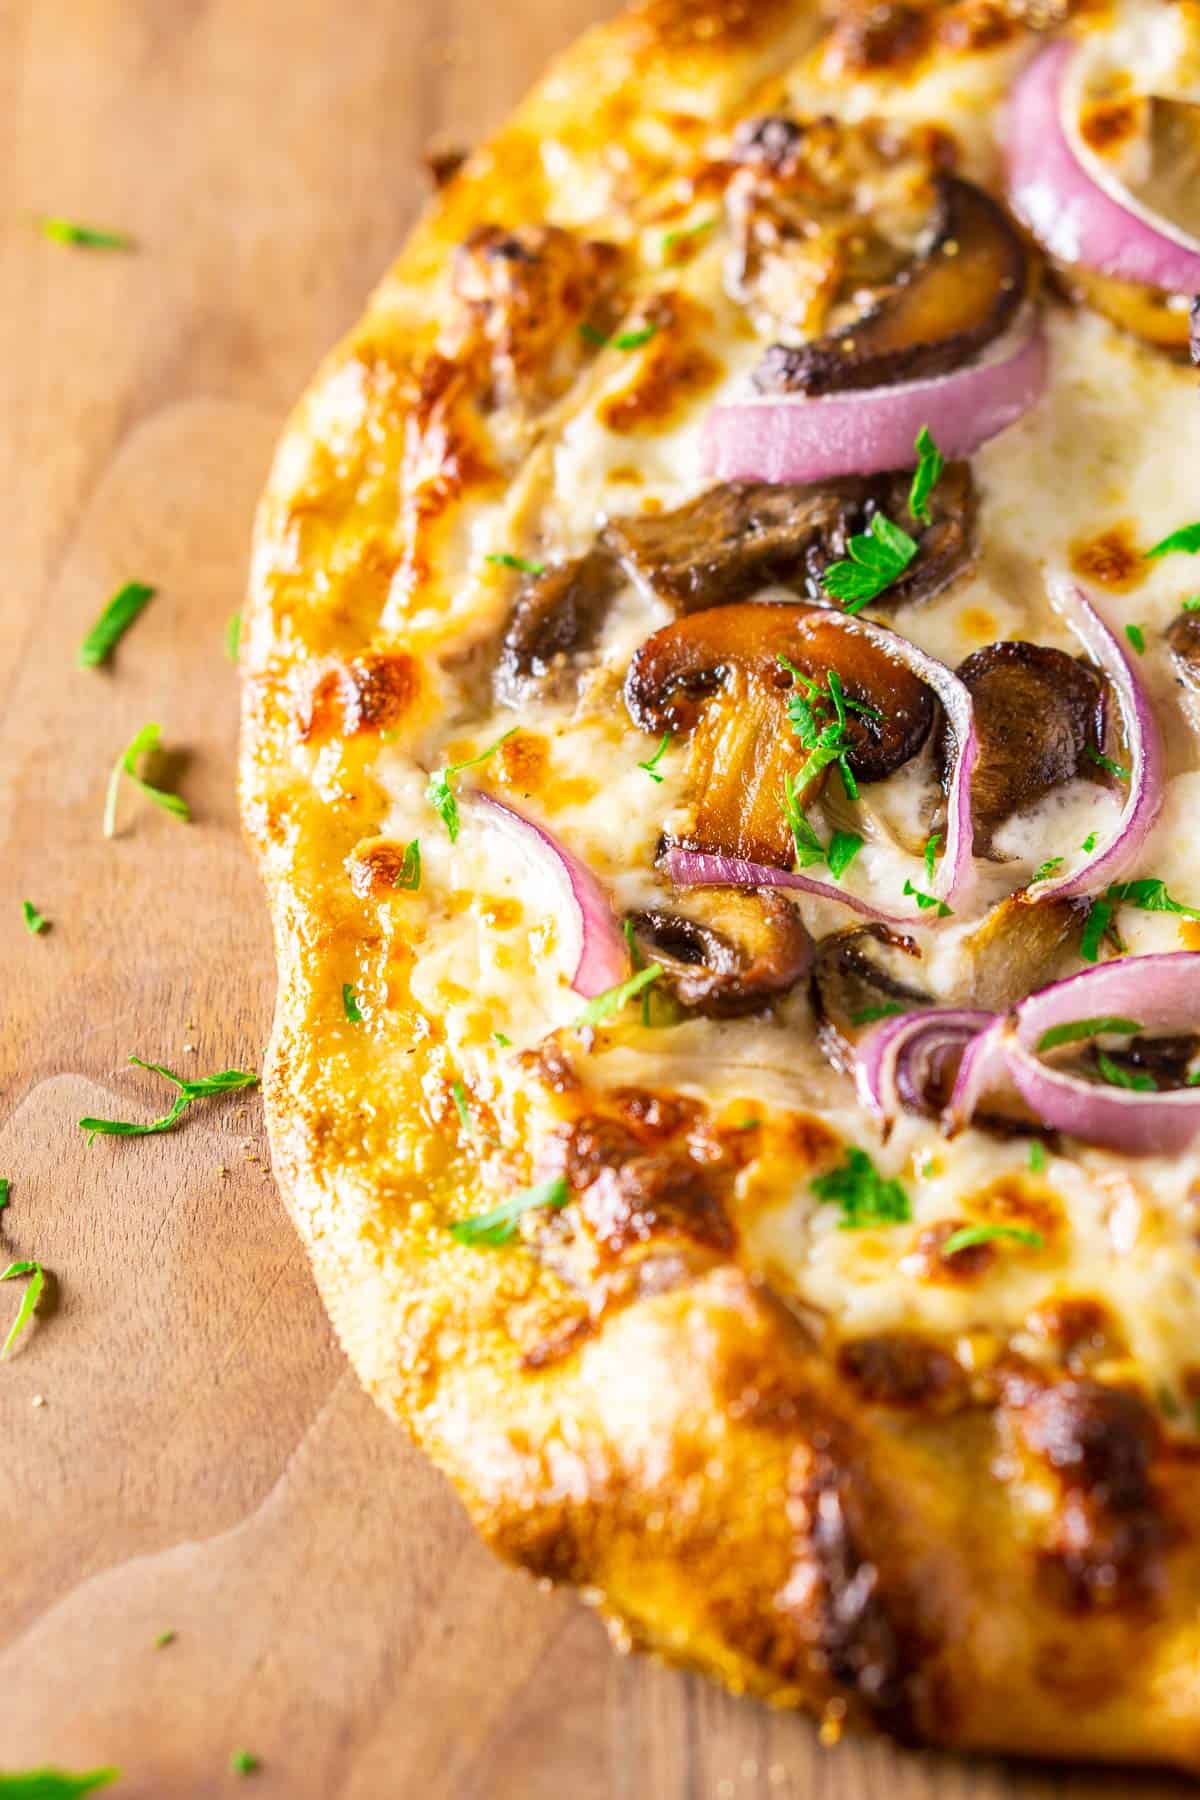 The finished make-ahead beer pizza dough with mushrooms, chicken, red onion and parsley.